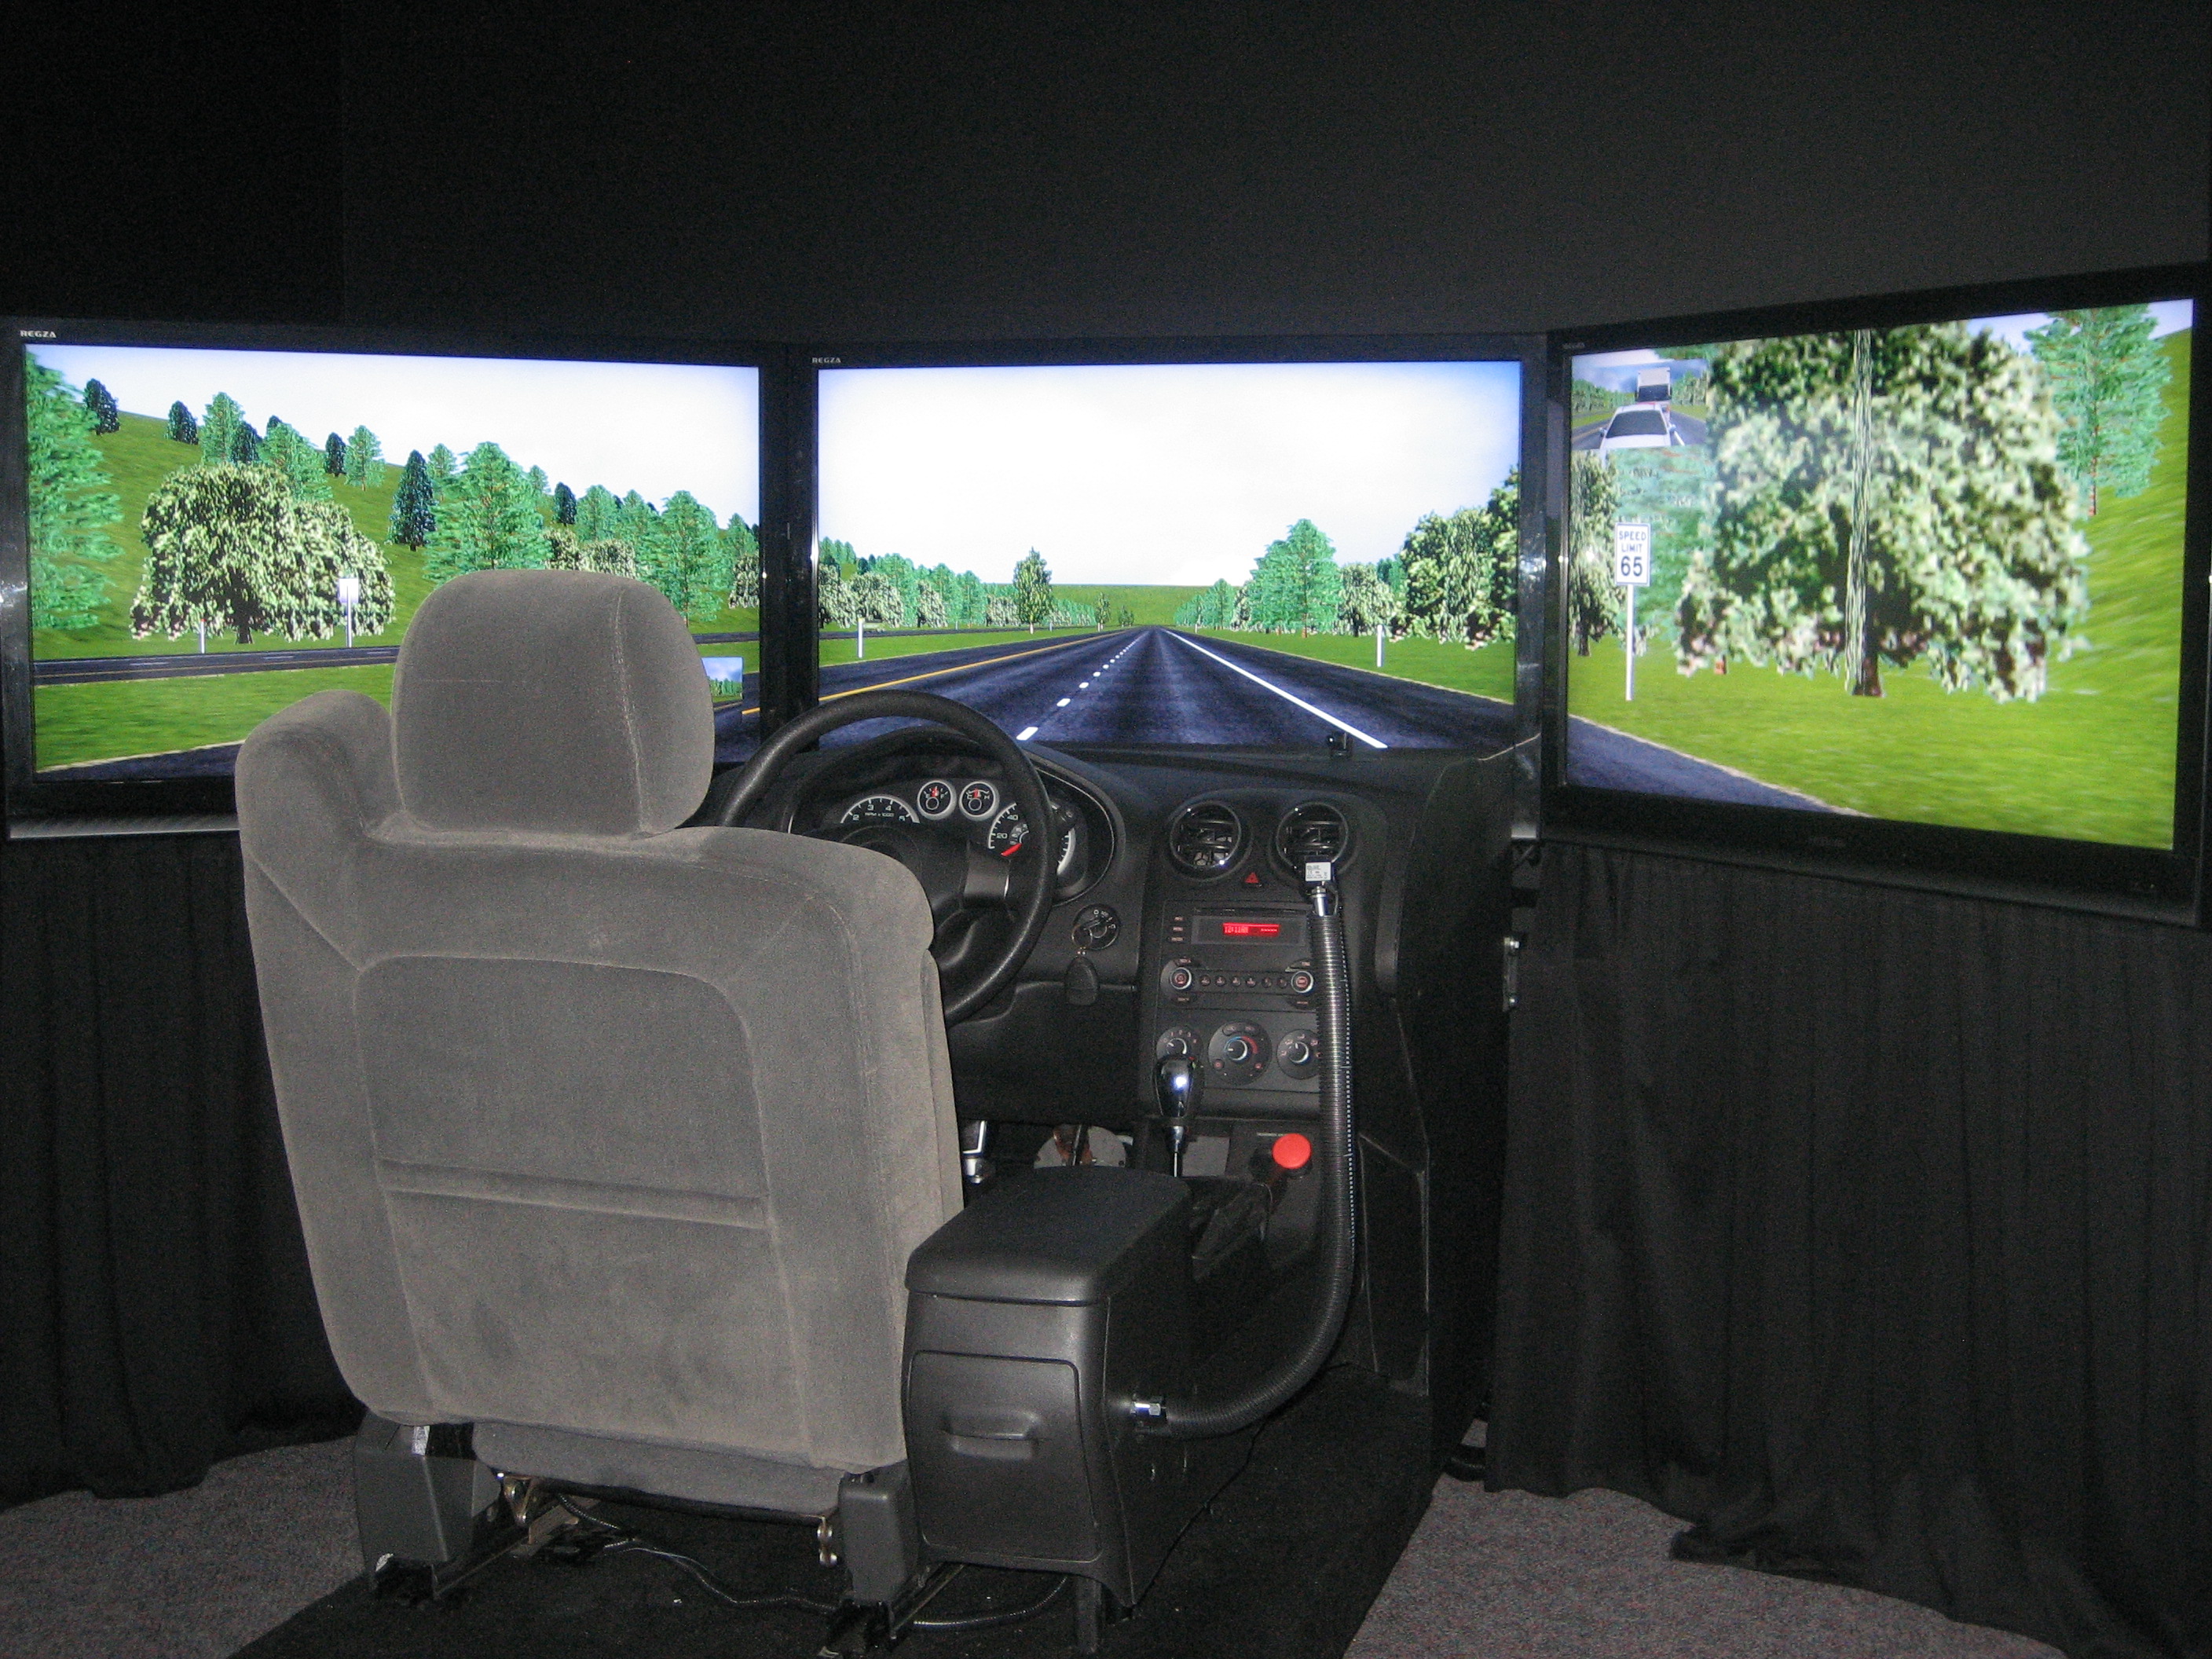 The driving simulator at the Center for Injury Research and Prevention at the Children’s Hospital of Philadelphia